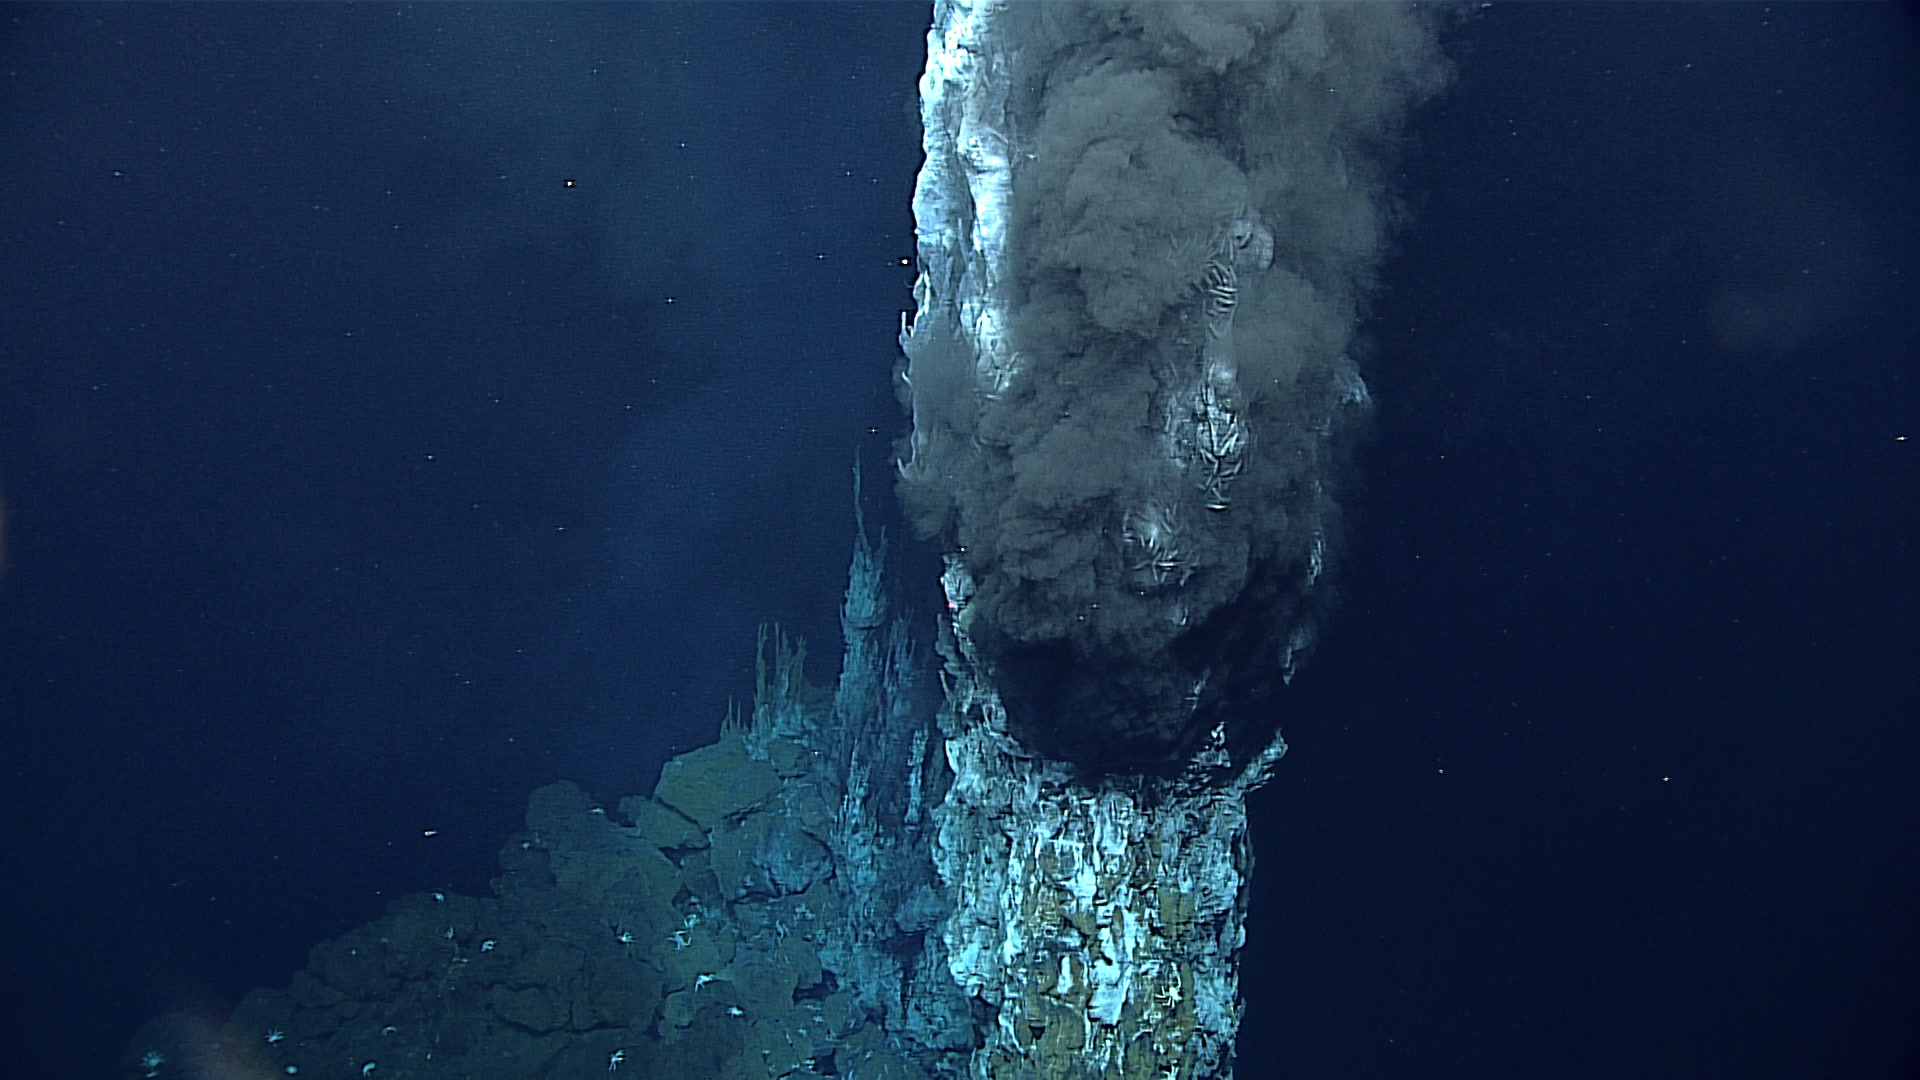 Mariana Trench hydrothermal vent